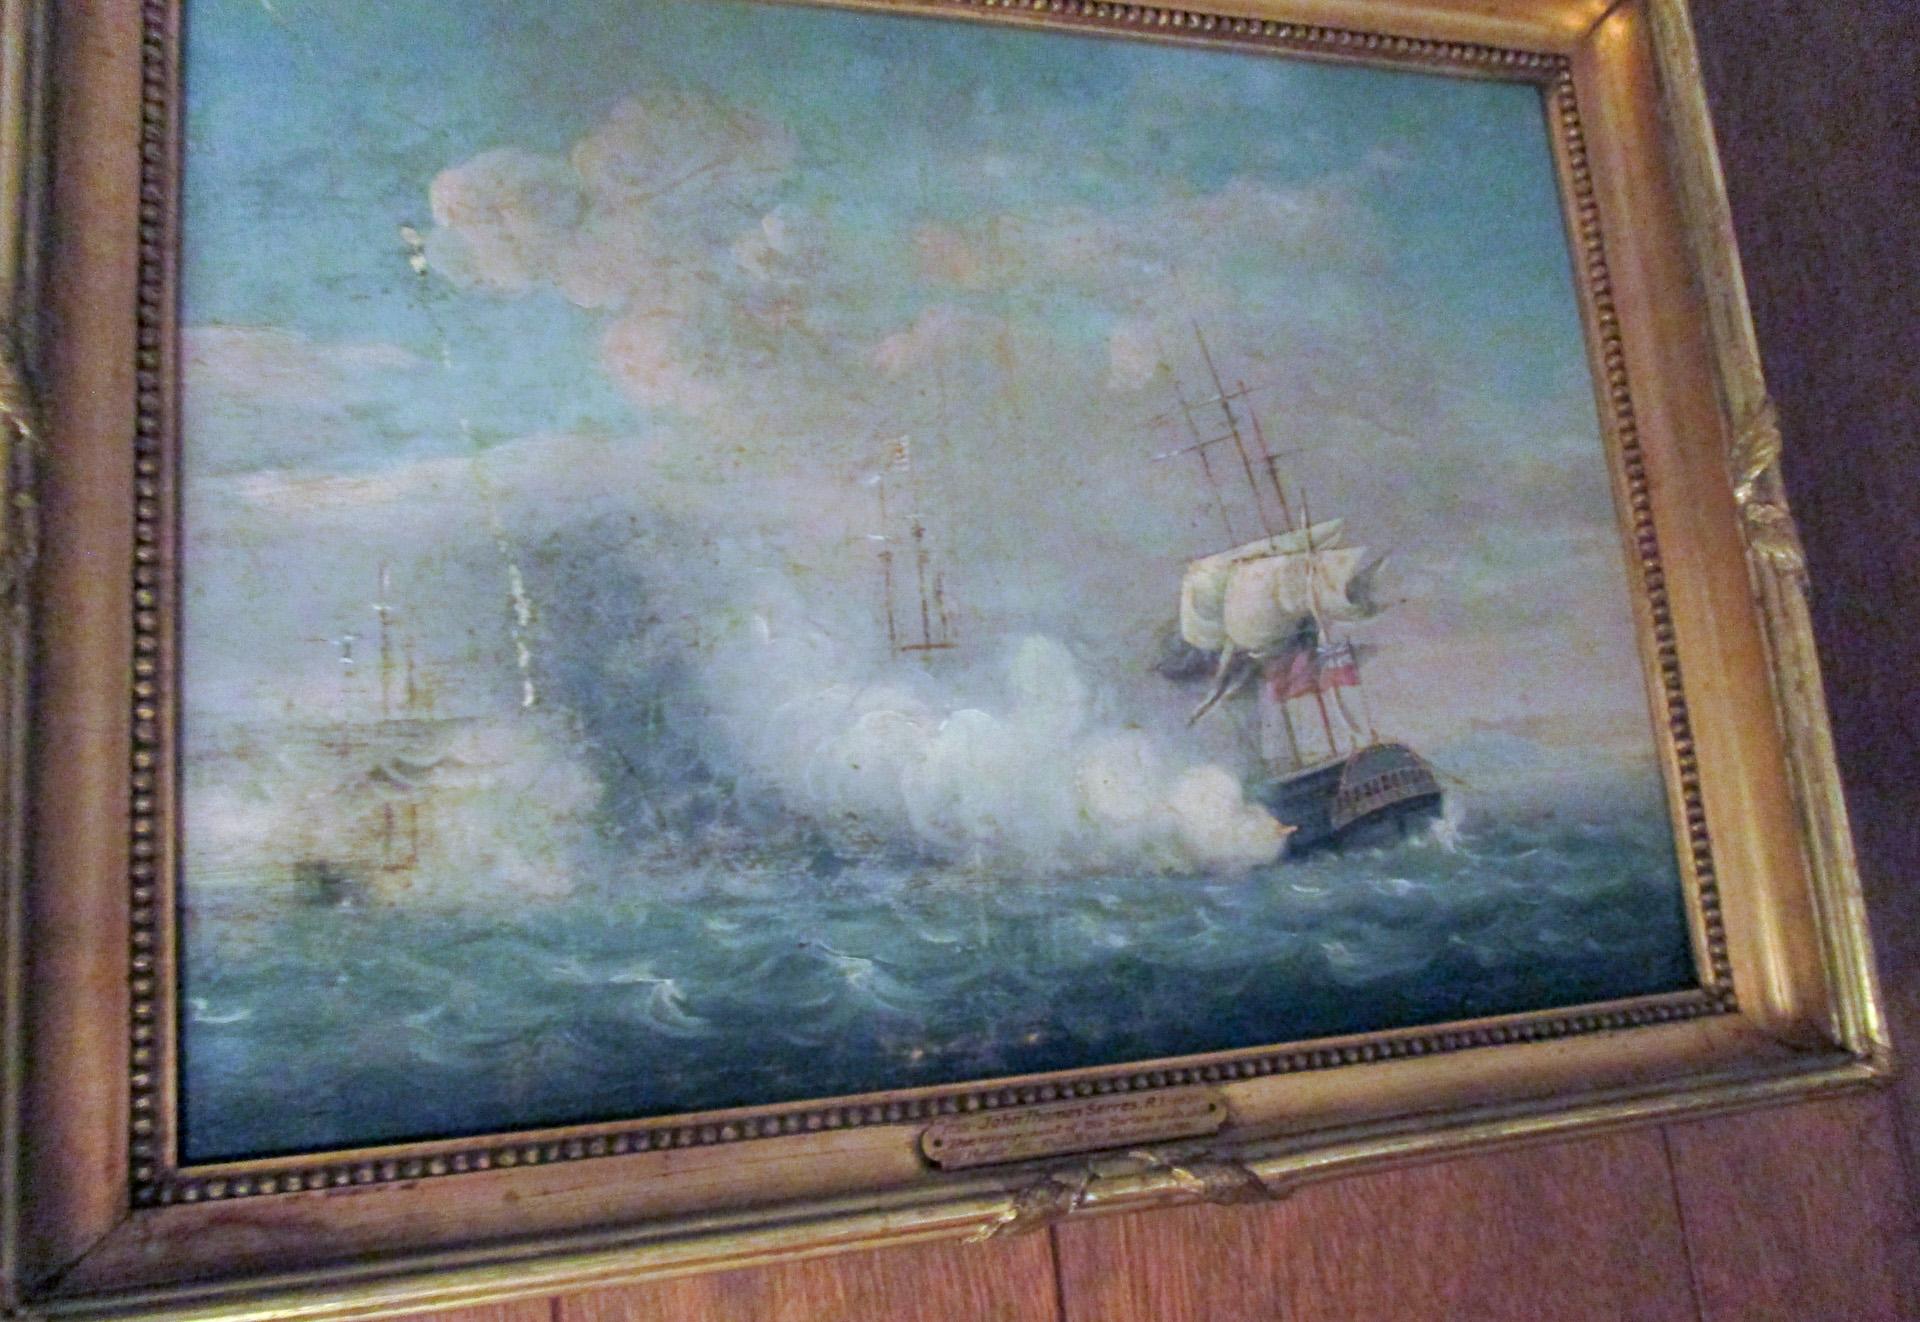 18th c Historical English India Naval Battle Oil Painting by John Thomas Serres For Sale 3